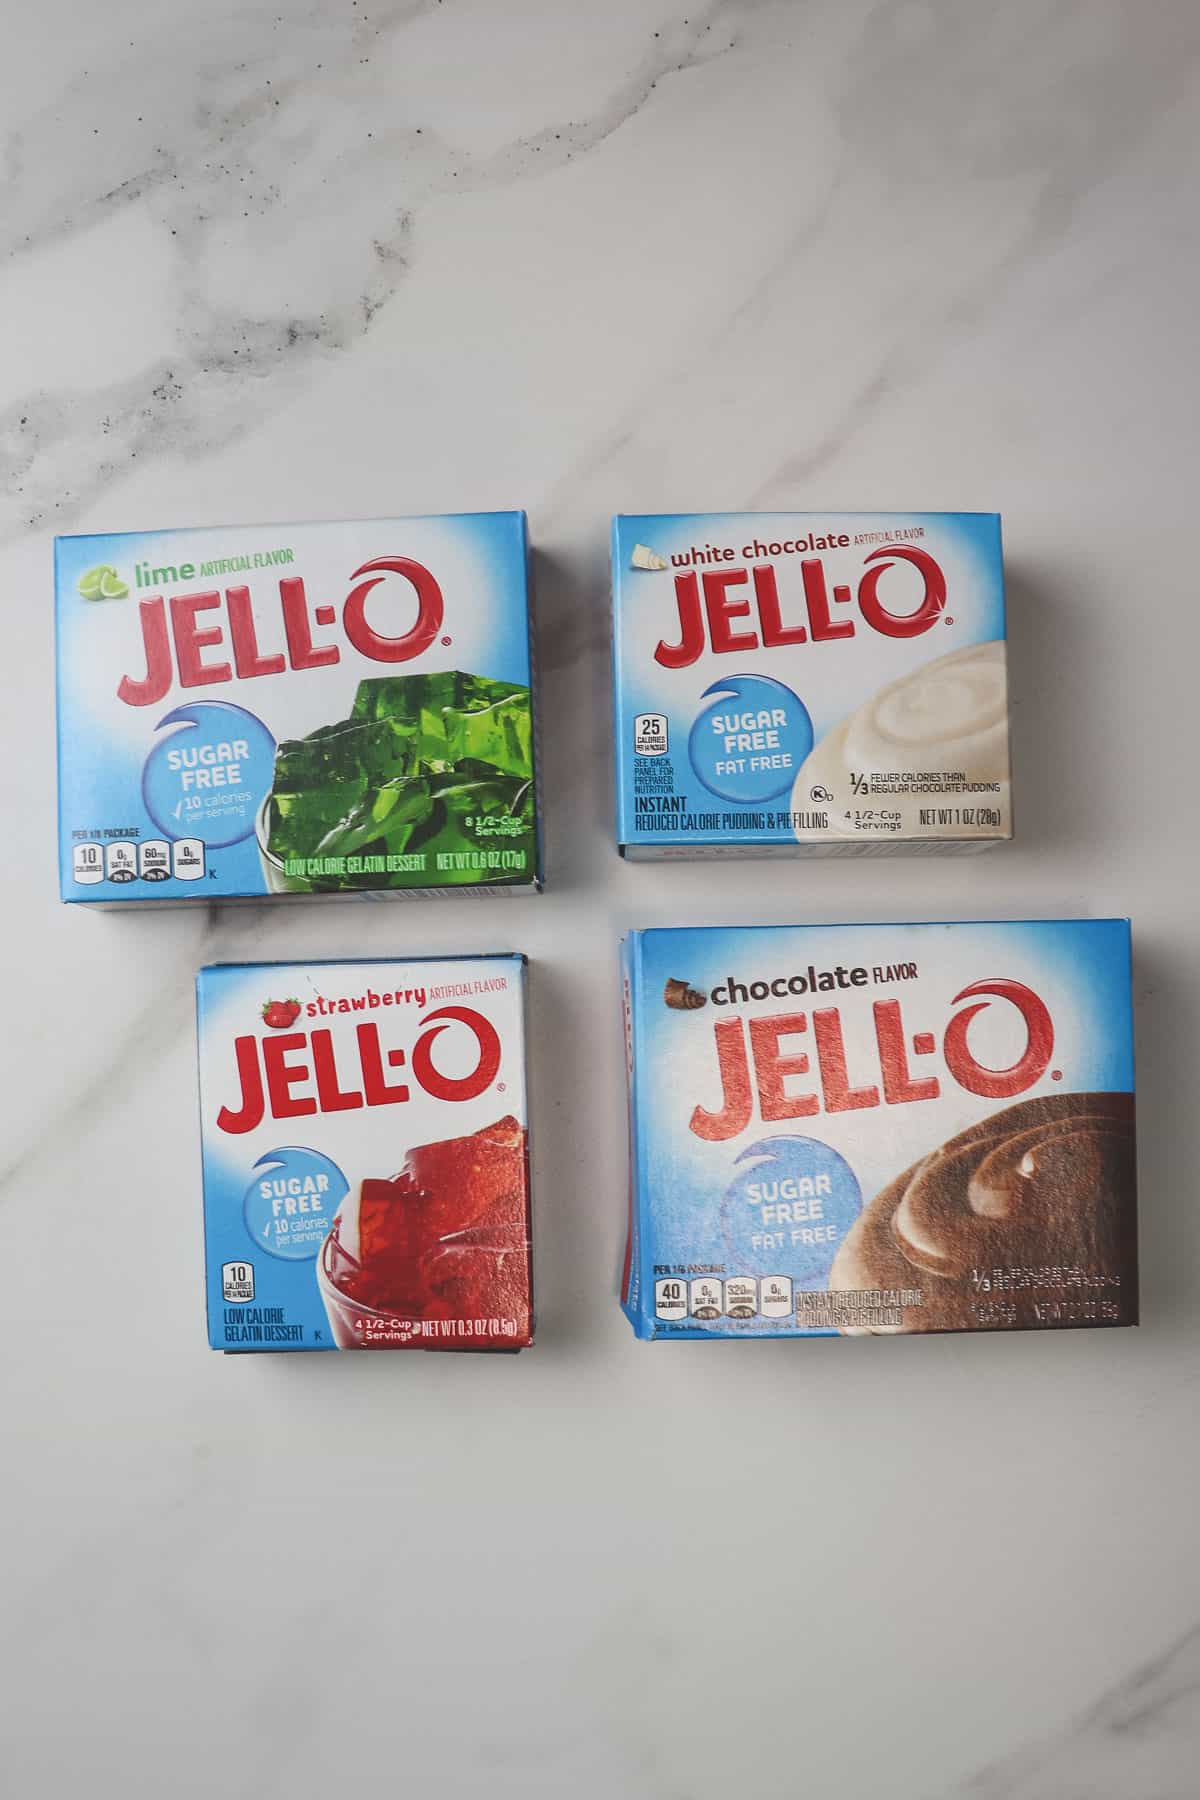 lime, white chocolate, strawberry, and chocolate jello boxes